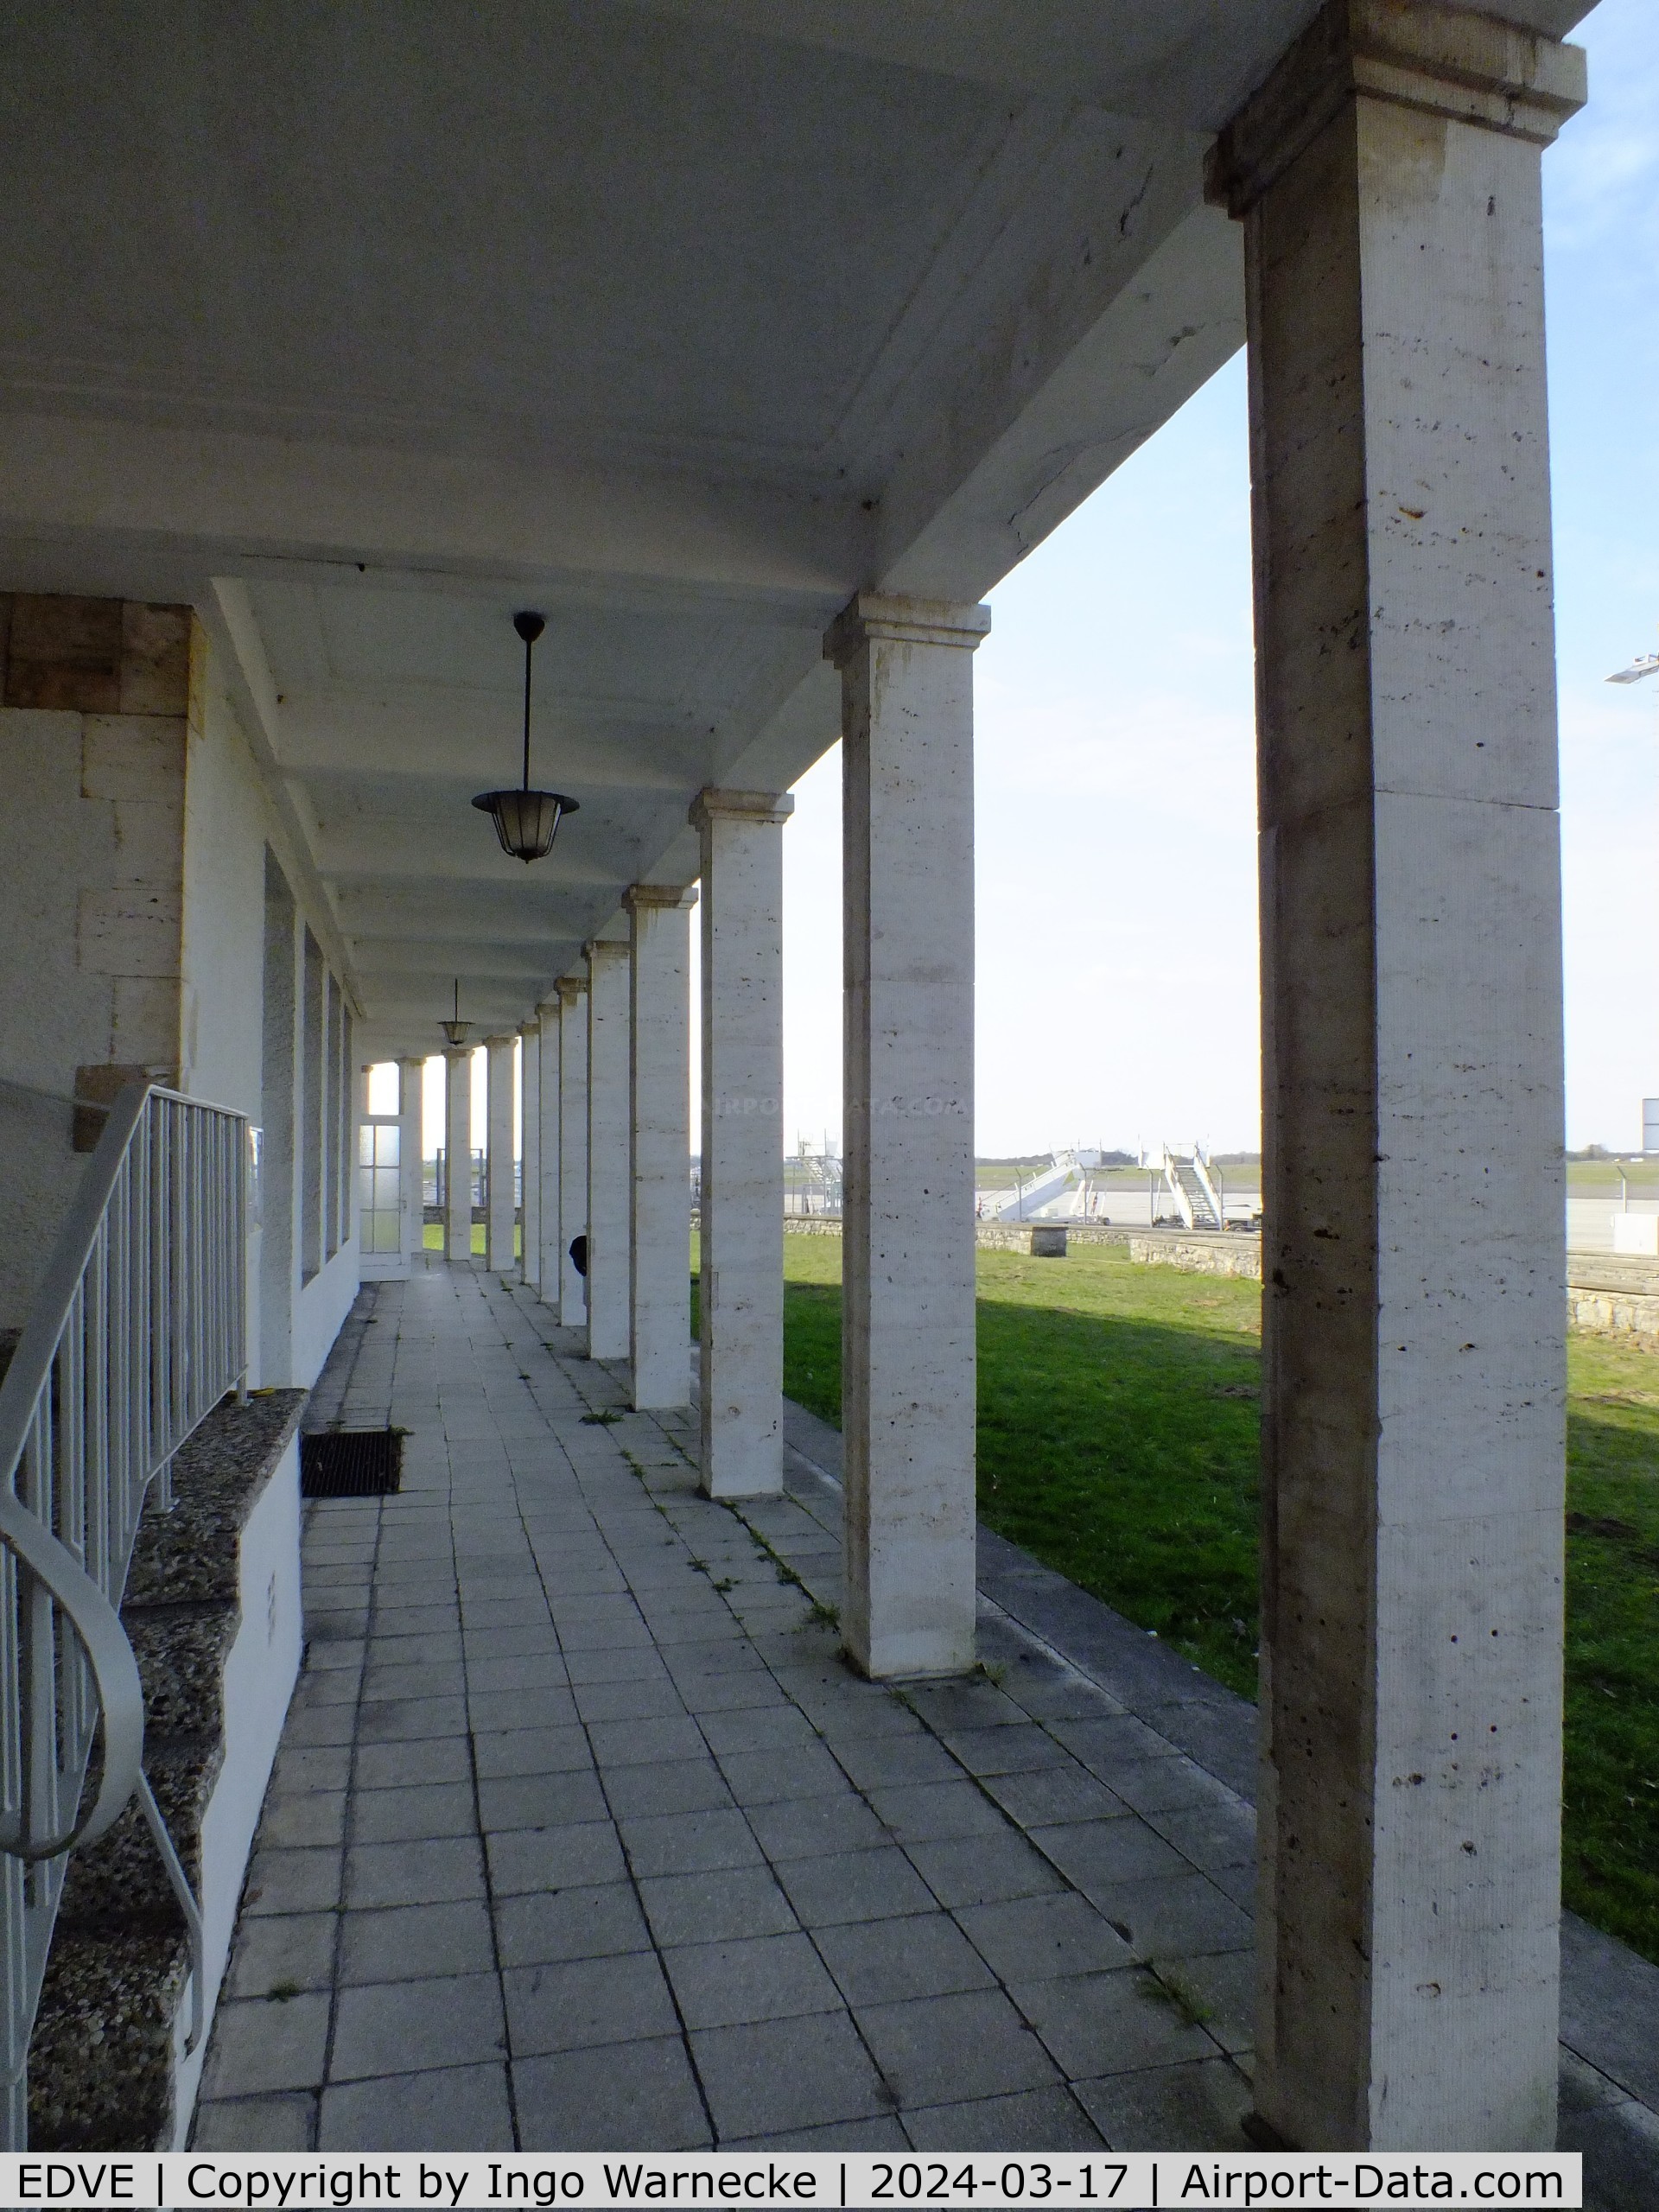 Braunschweig-Wolfsburg Regional Airport, Braunschweig, Lower Saxony Germany (EDVE) - looking west through the colonnades of the visitors terrace of Braunschweig/Wolfsburg airport, BS/Waggum